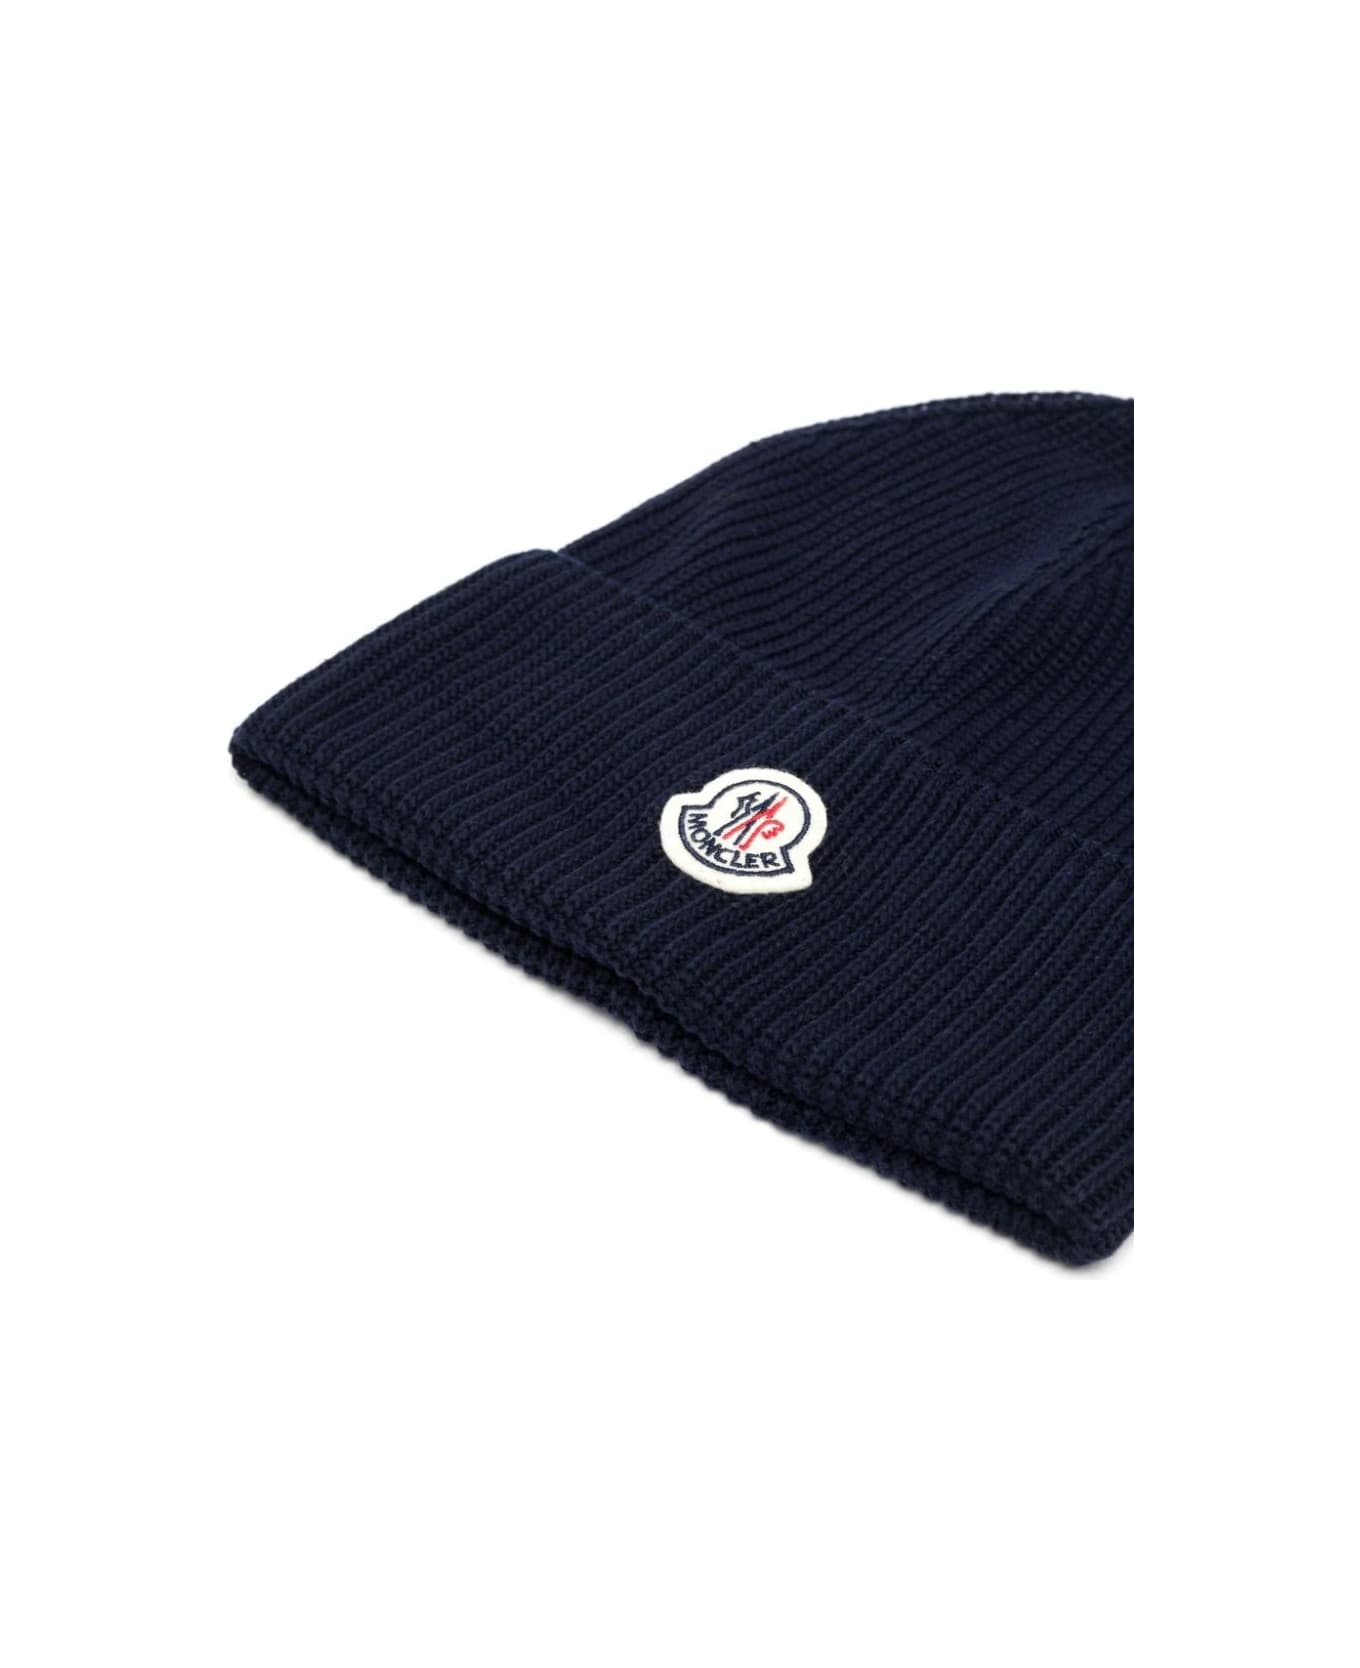 Moncler Navy Blue Cotton Beanie With Logo - Blue